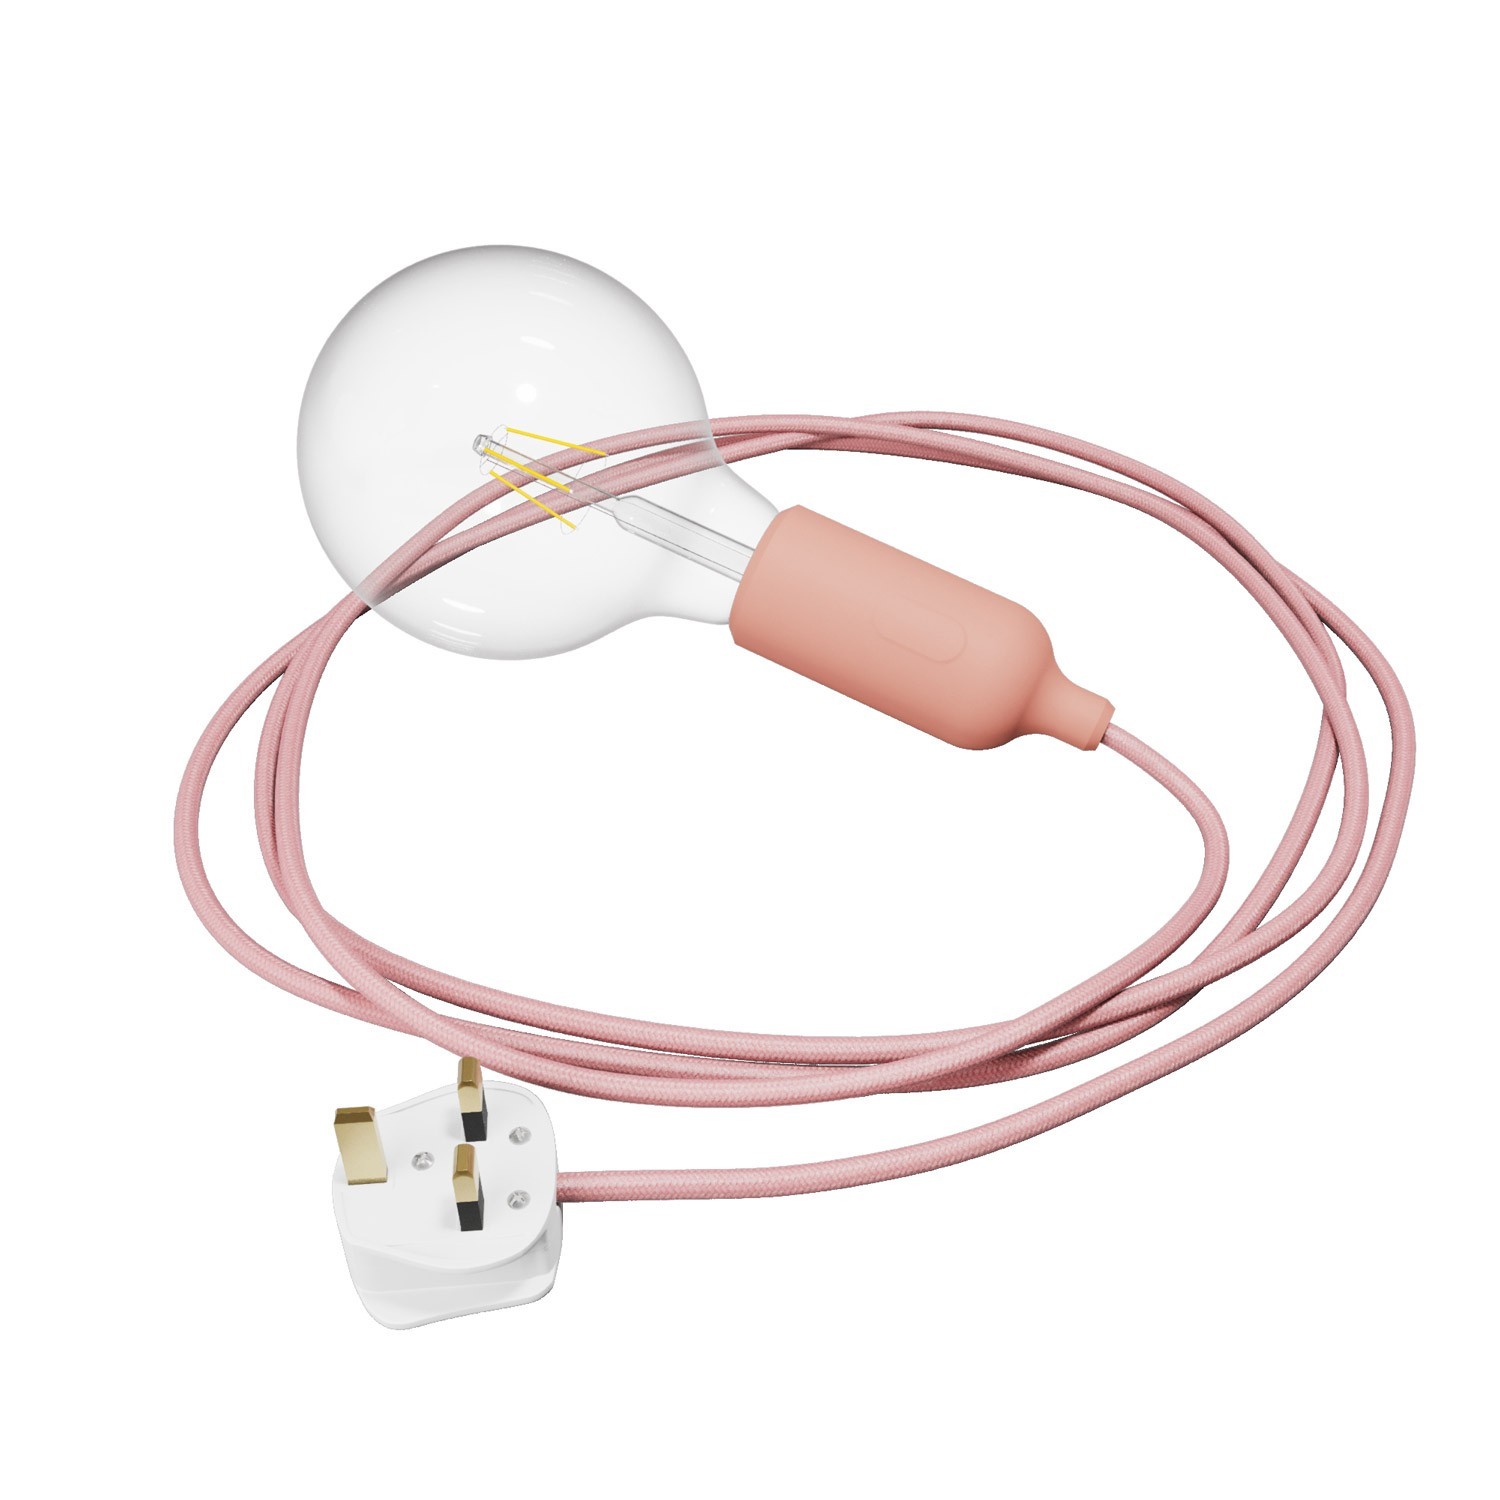 Silicone Snake lamp with switch and UK plug